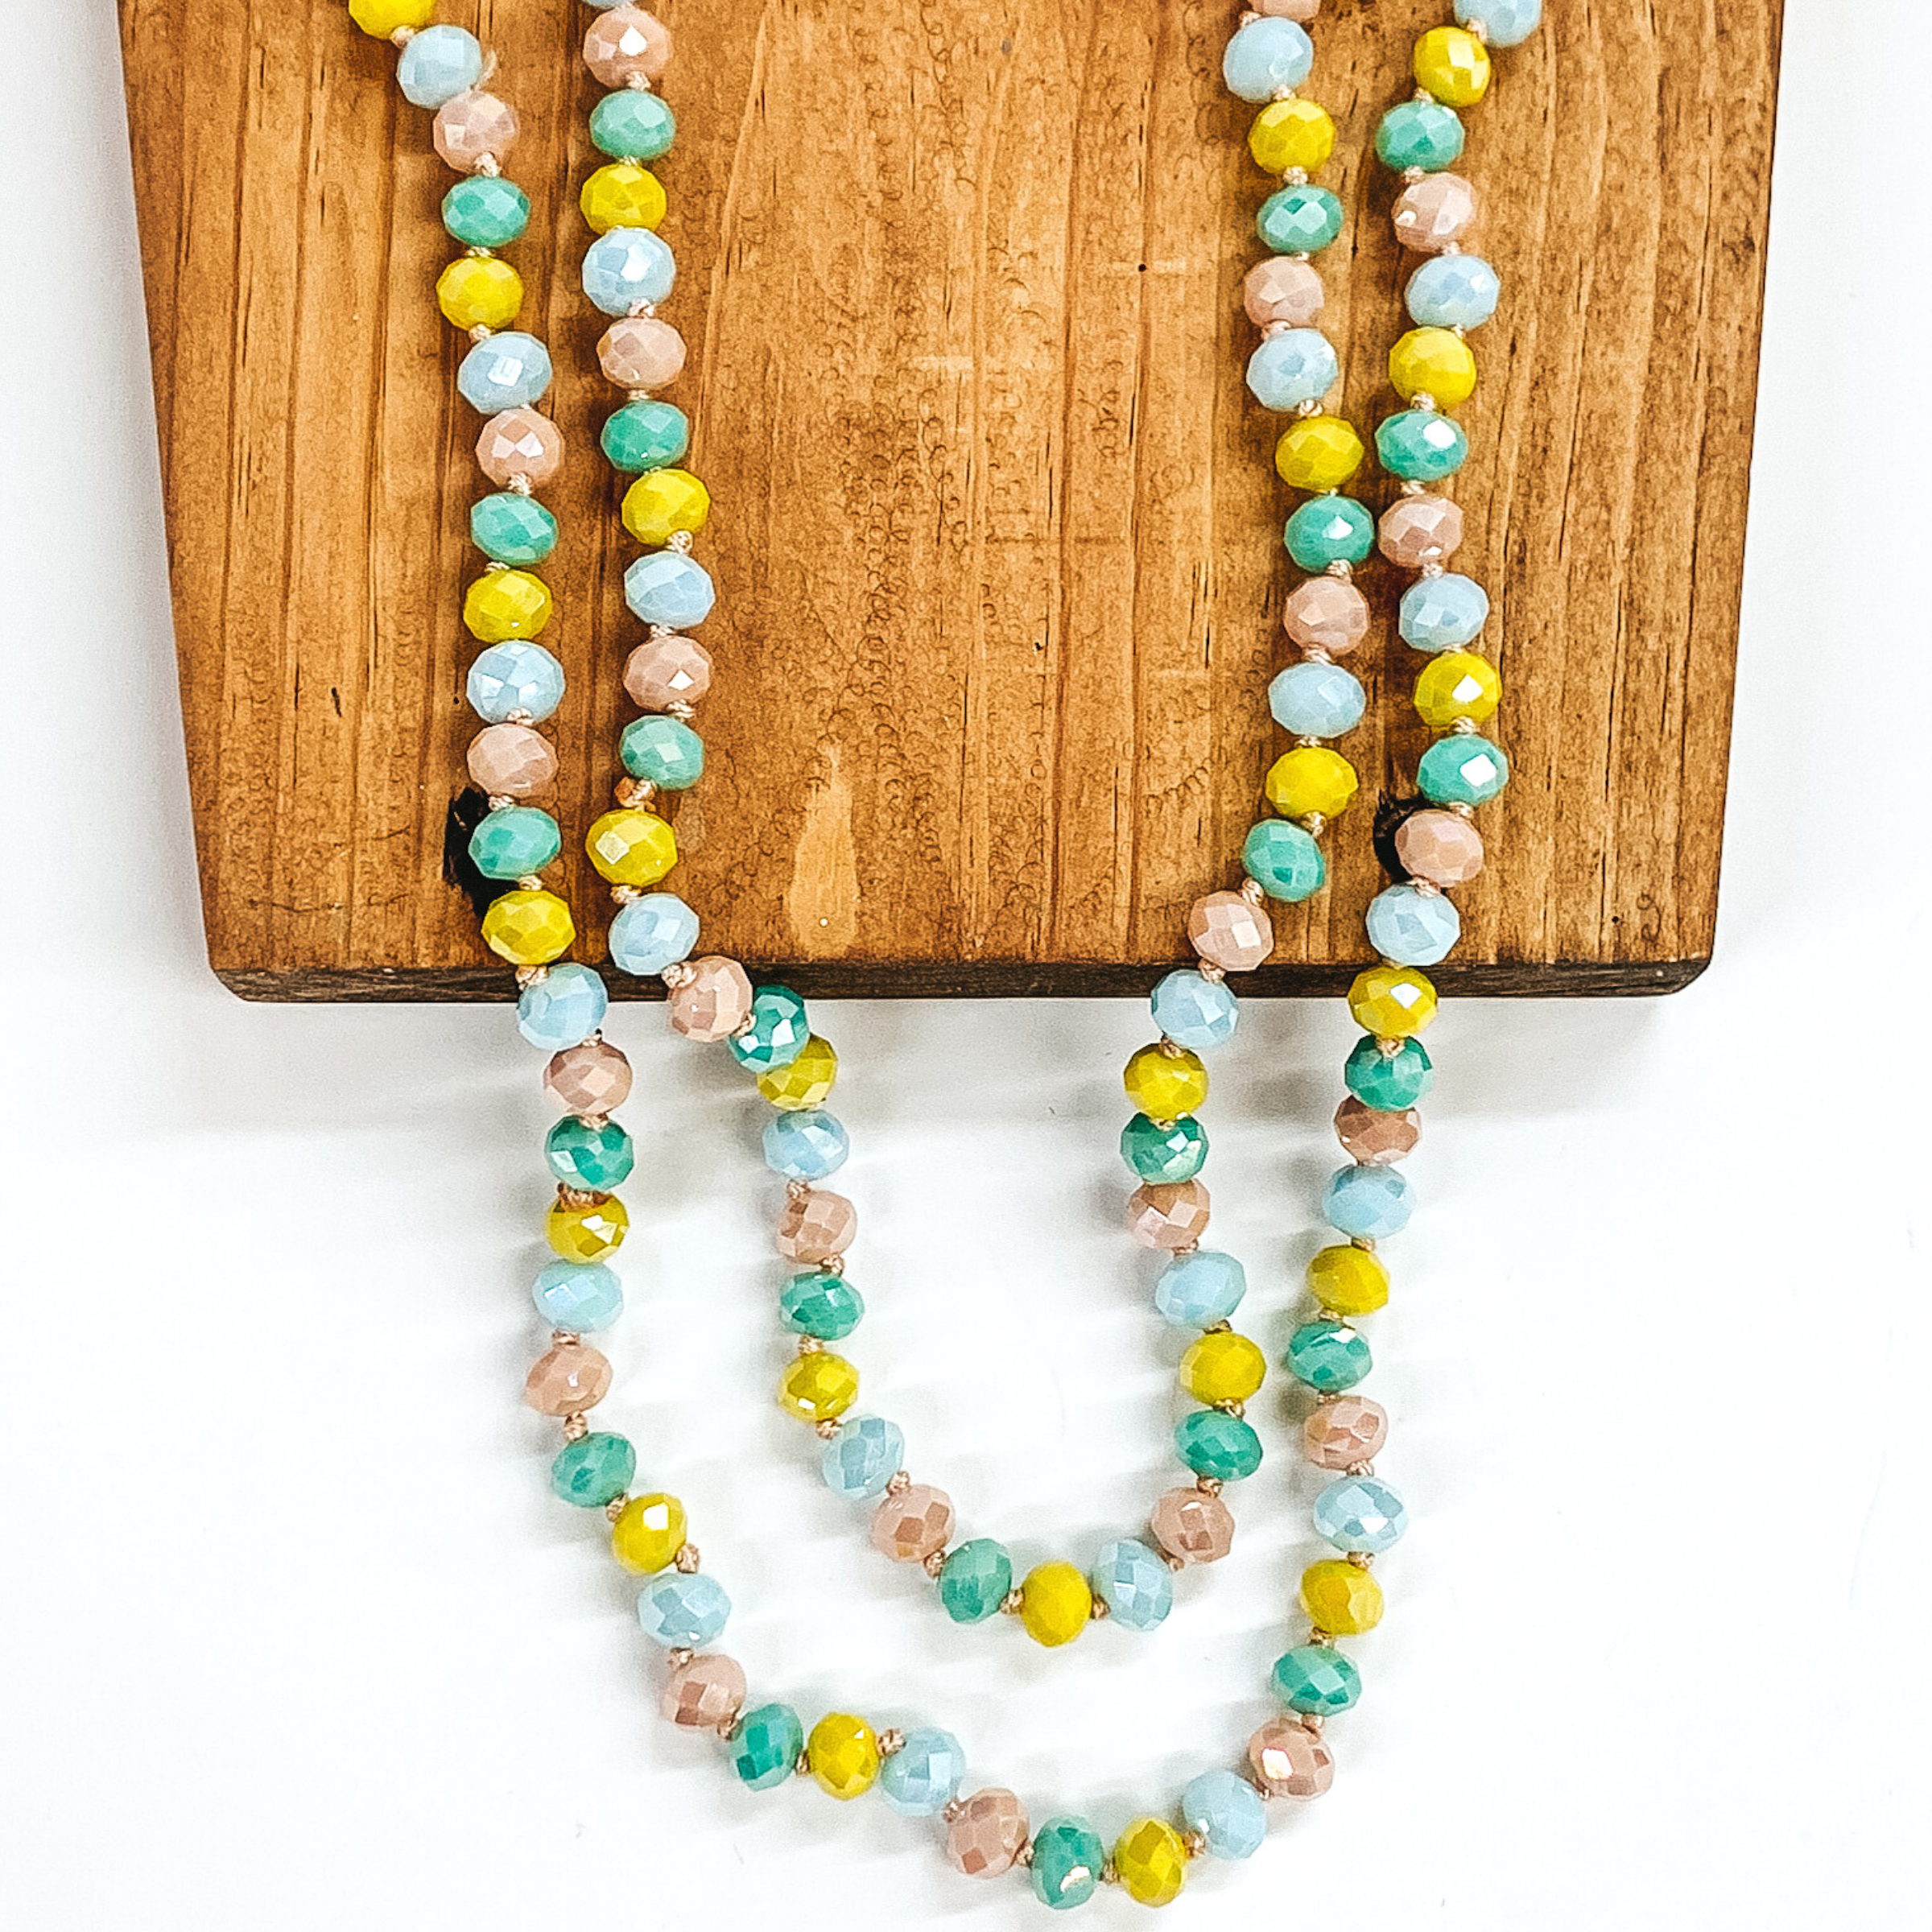 Crystal beaded necklace in green, blue, yellow, and taupe. This necklace is pictured on a wooden necklace holder on a white background. 